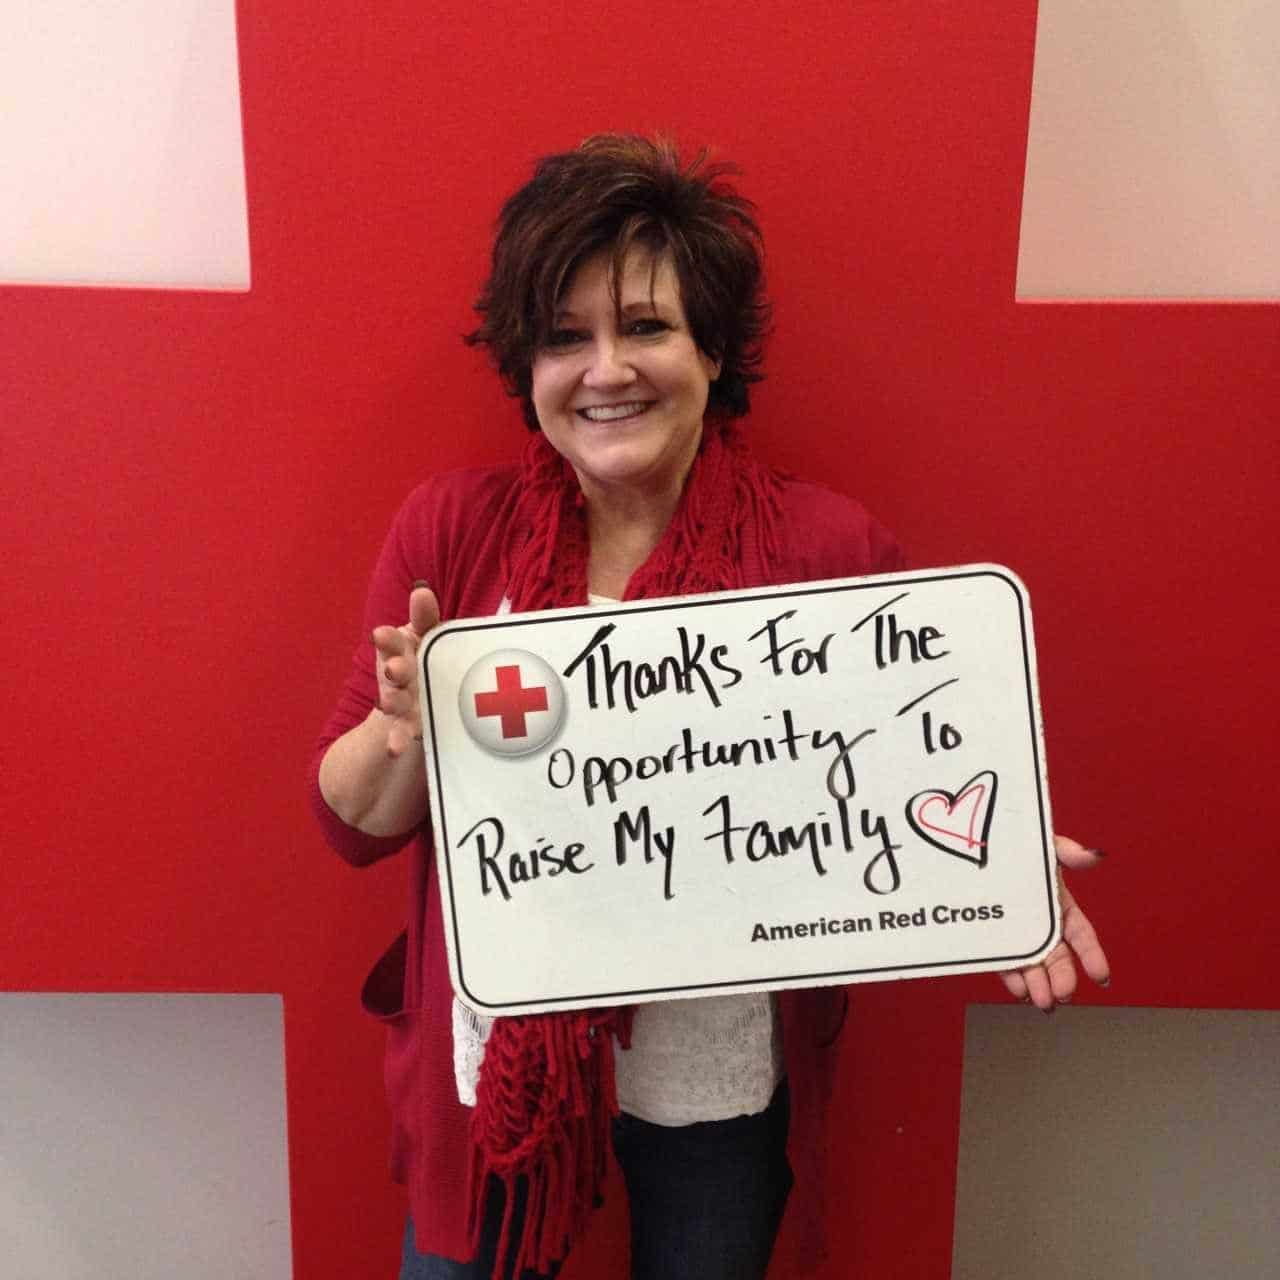 Sheri holding up a sign thanking blood donors for the opportunity to raise her family.